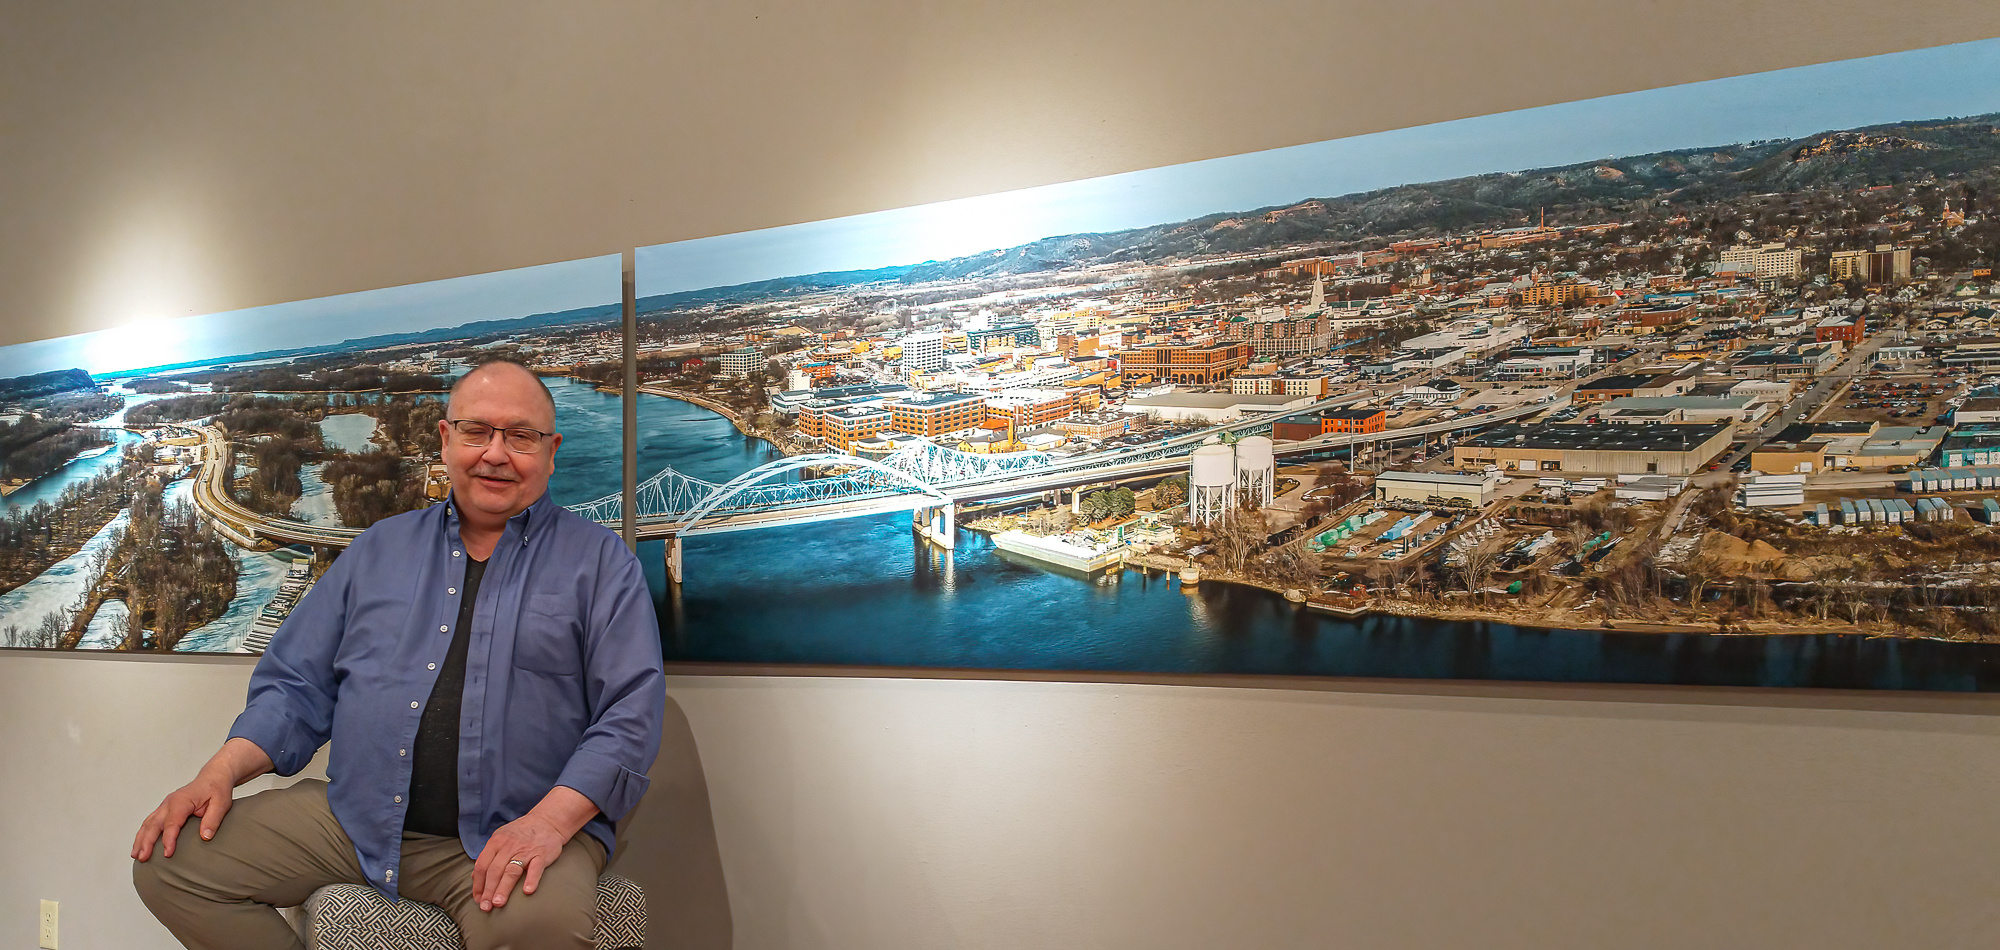 The Seventeen Bridges gallery print is 30 x 160 inch diptych currently on display at Gallery 1802 in La Crosse, Wisconsin.